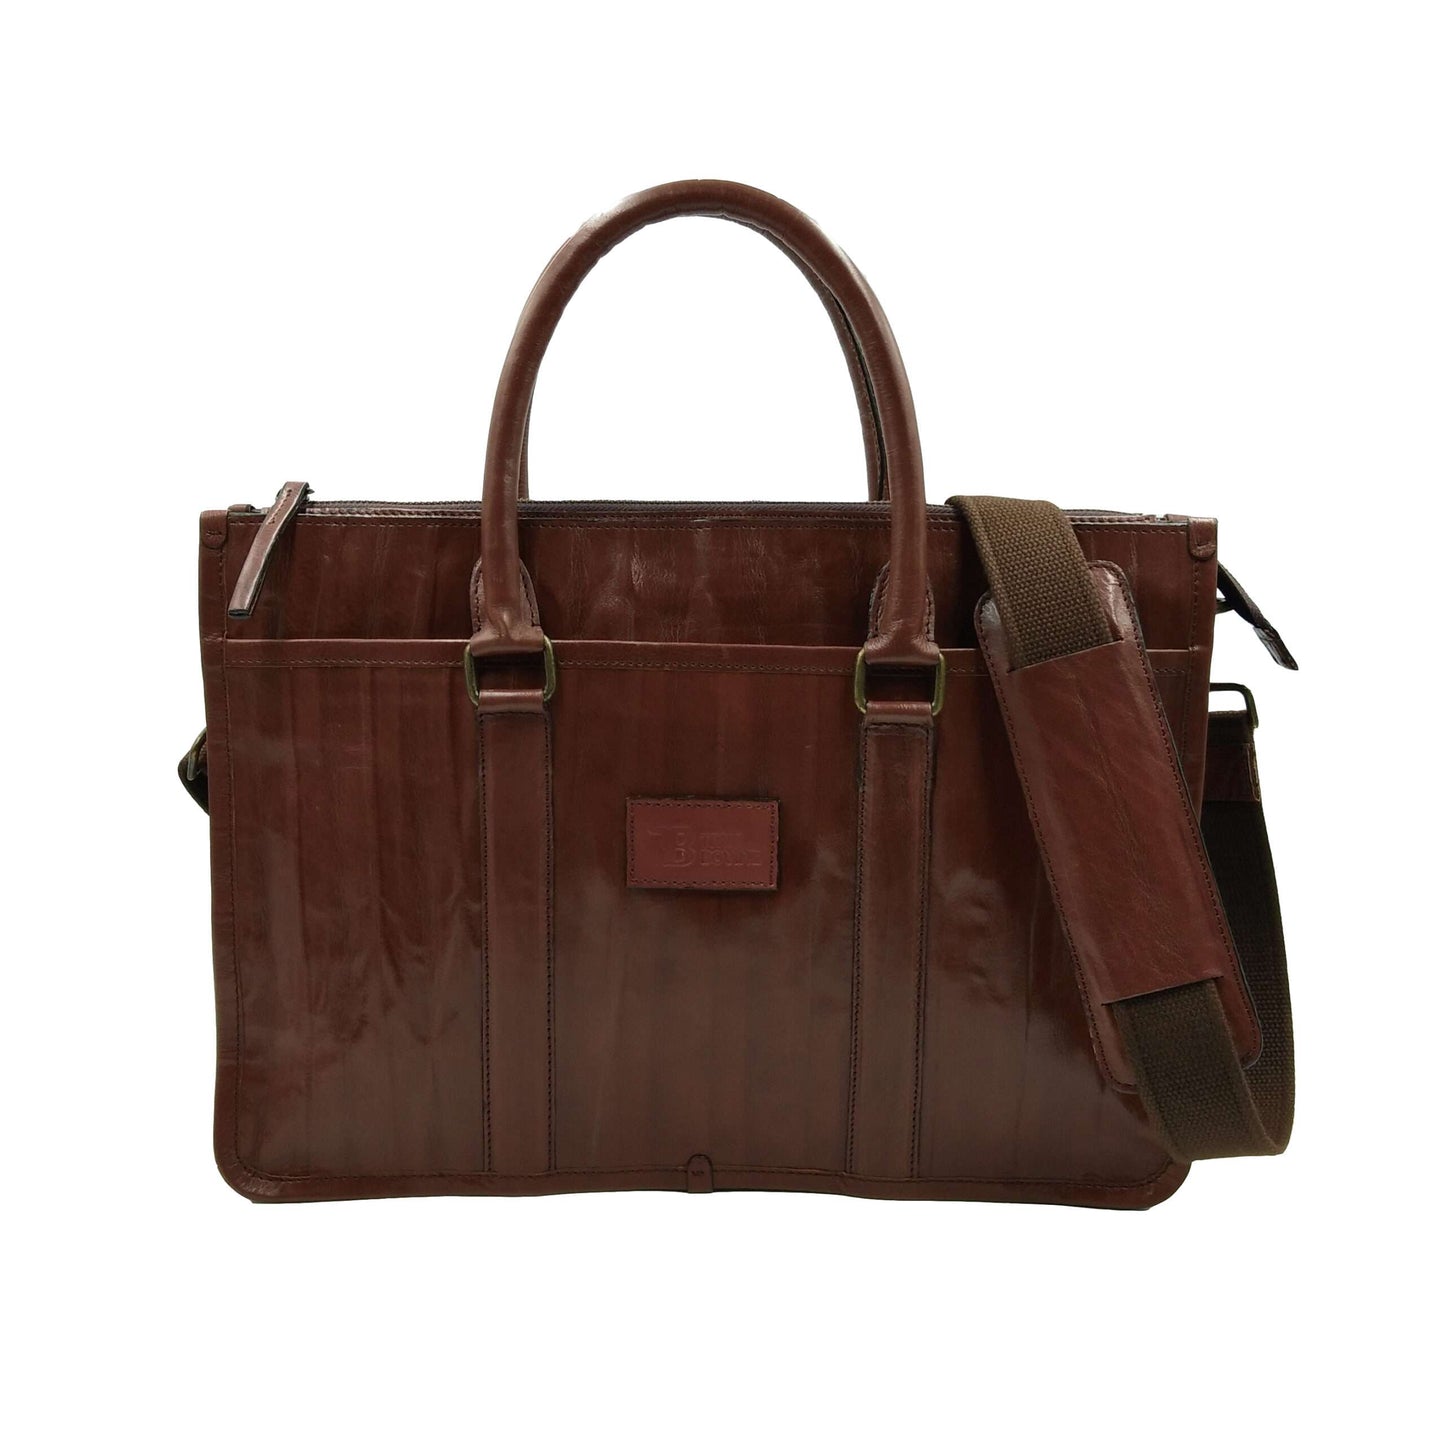 Launch Bamboo Leather Laptop Bag